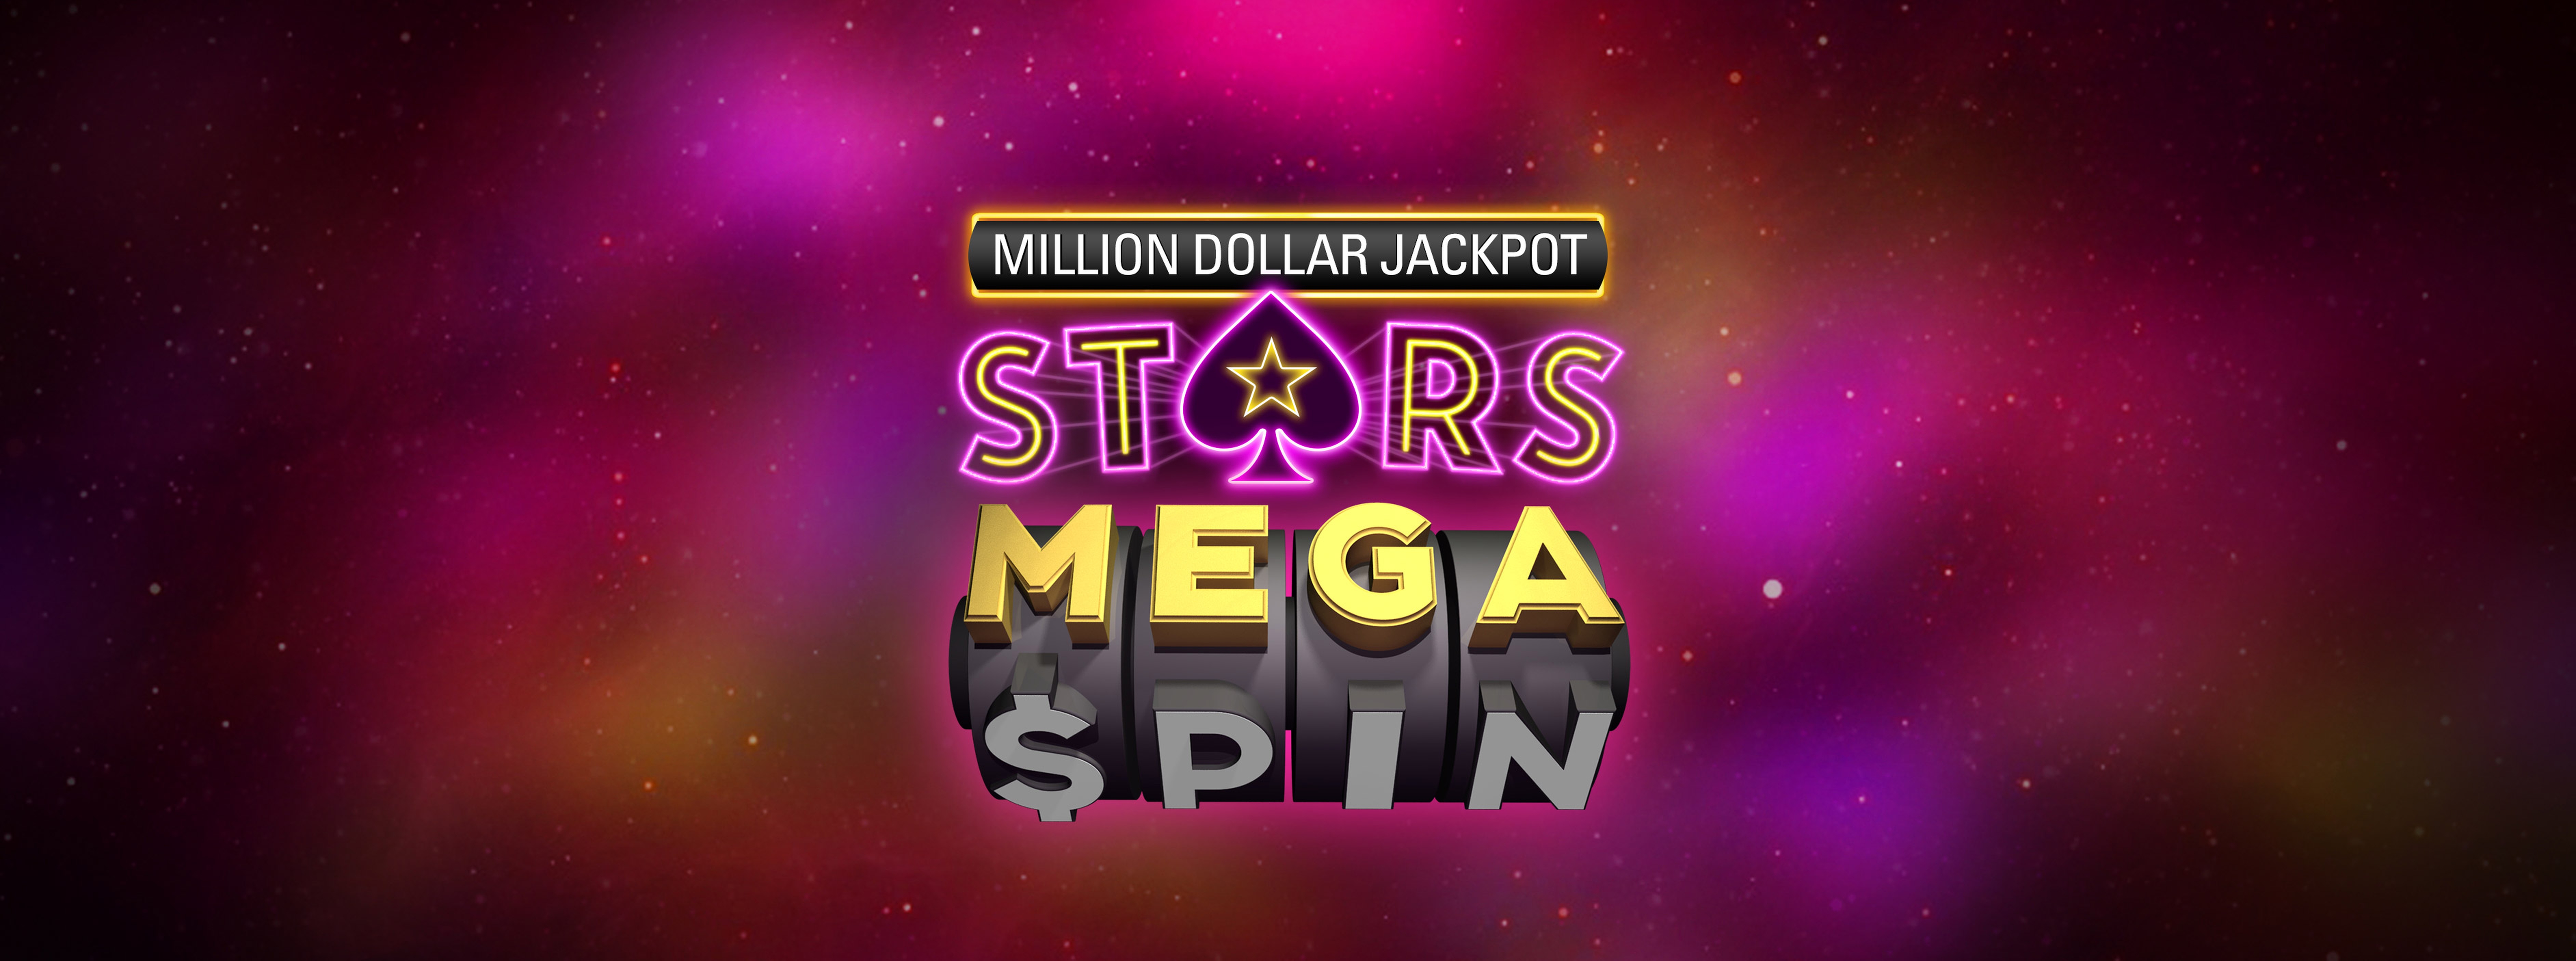 The Stars Mega Spin Online Slot Demo Game by The Stars Group